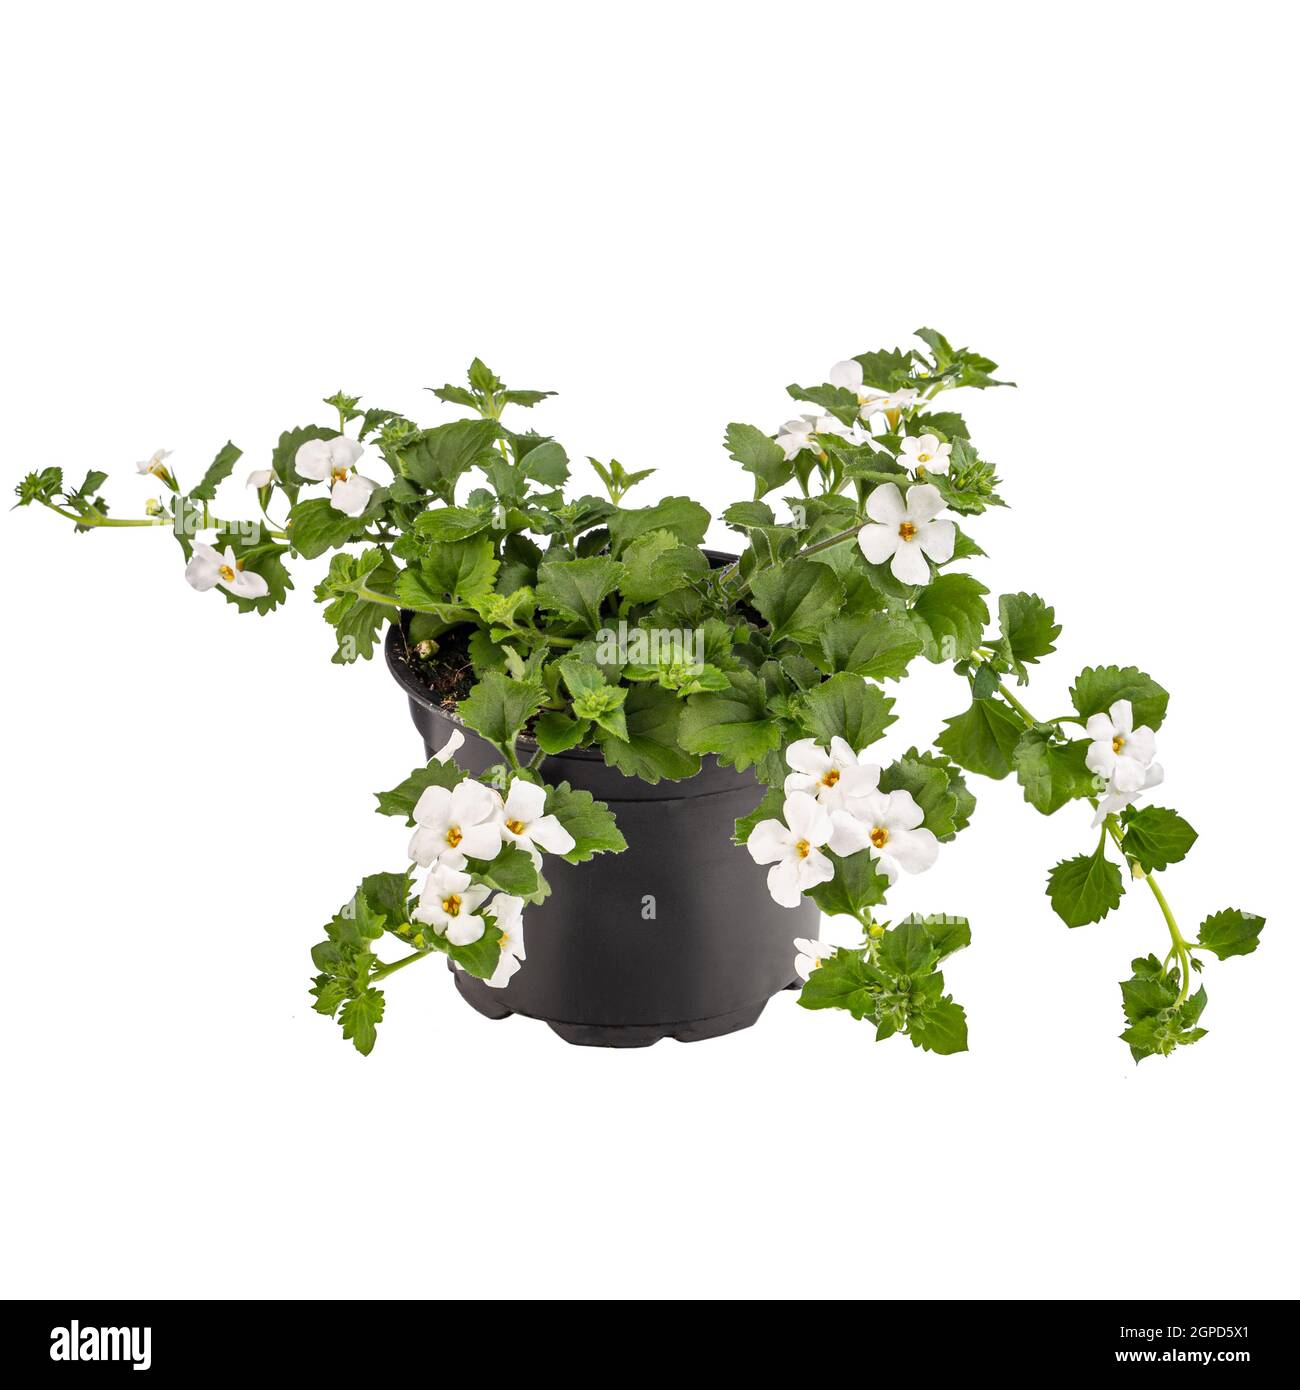 Bacopa monnieri, the common names water hyssop in flowerpot on white background Stock Photo